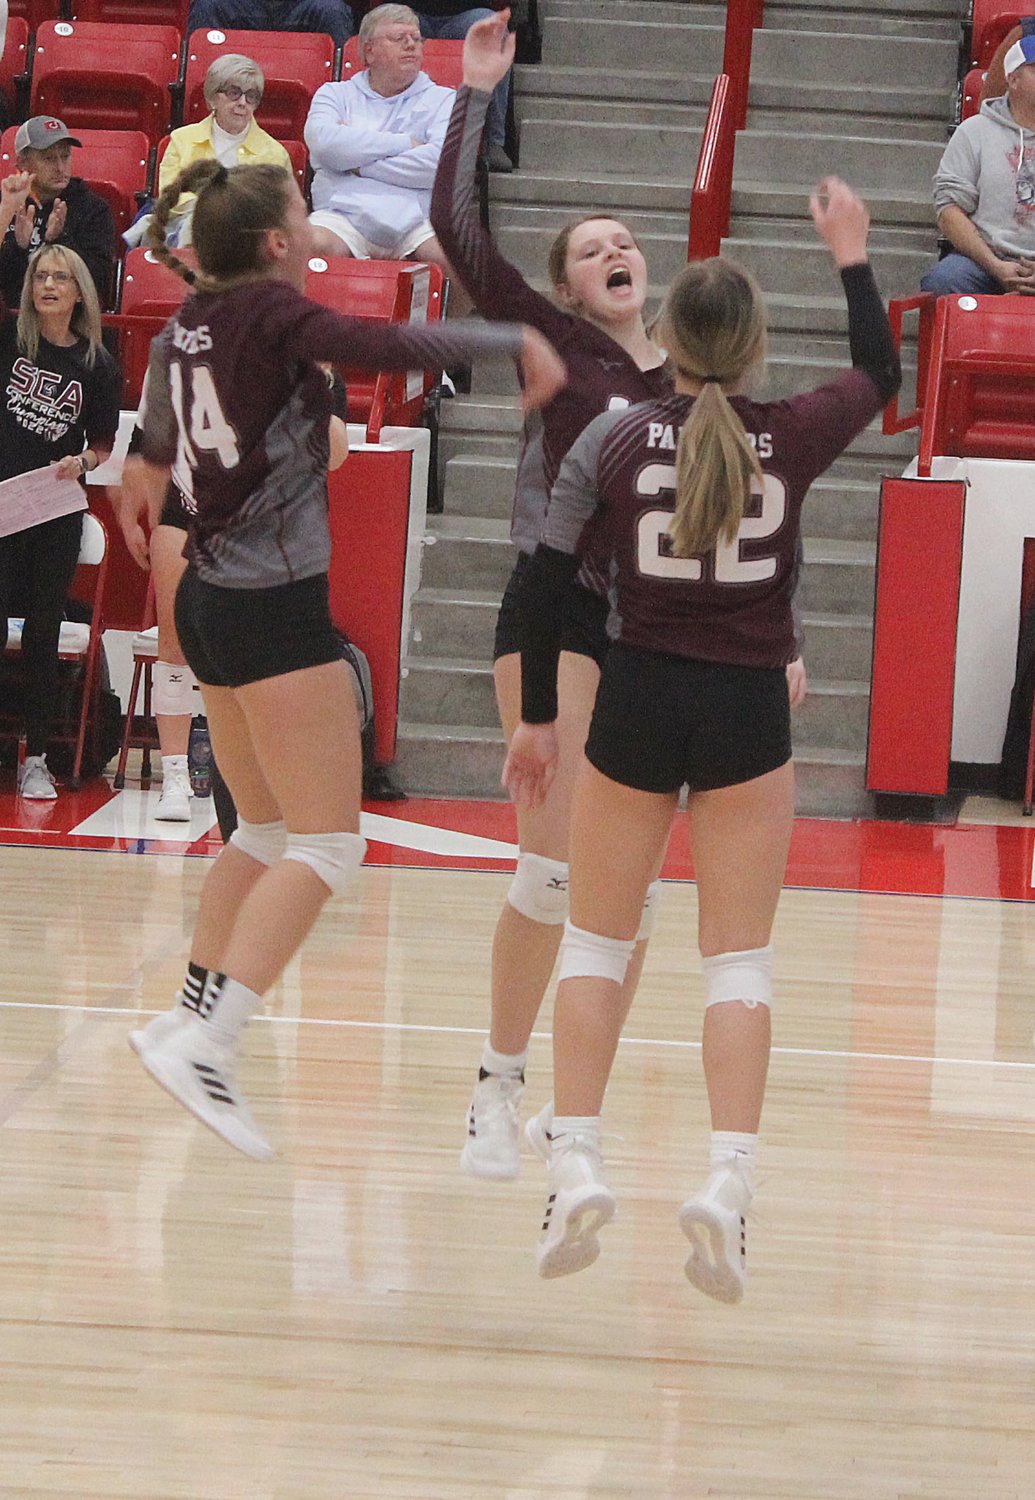 Reagan Hoerning, Erecka Penner and Jozey MacPherson go high in the air to celebrate an ace in sectionals.